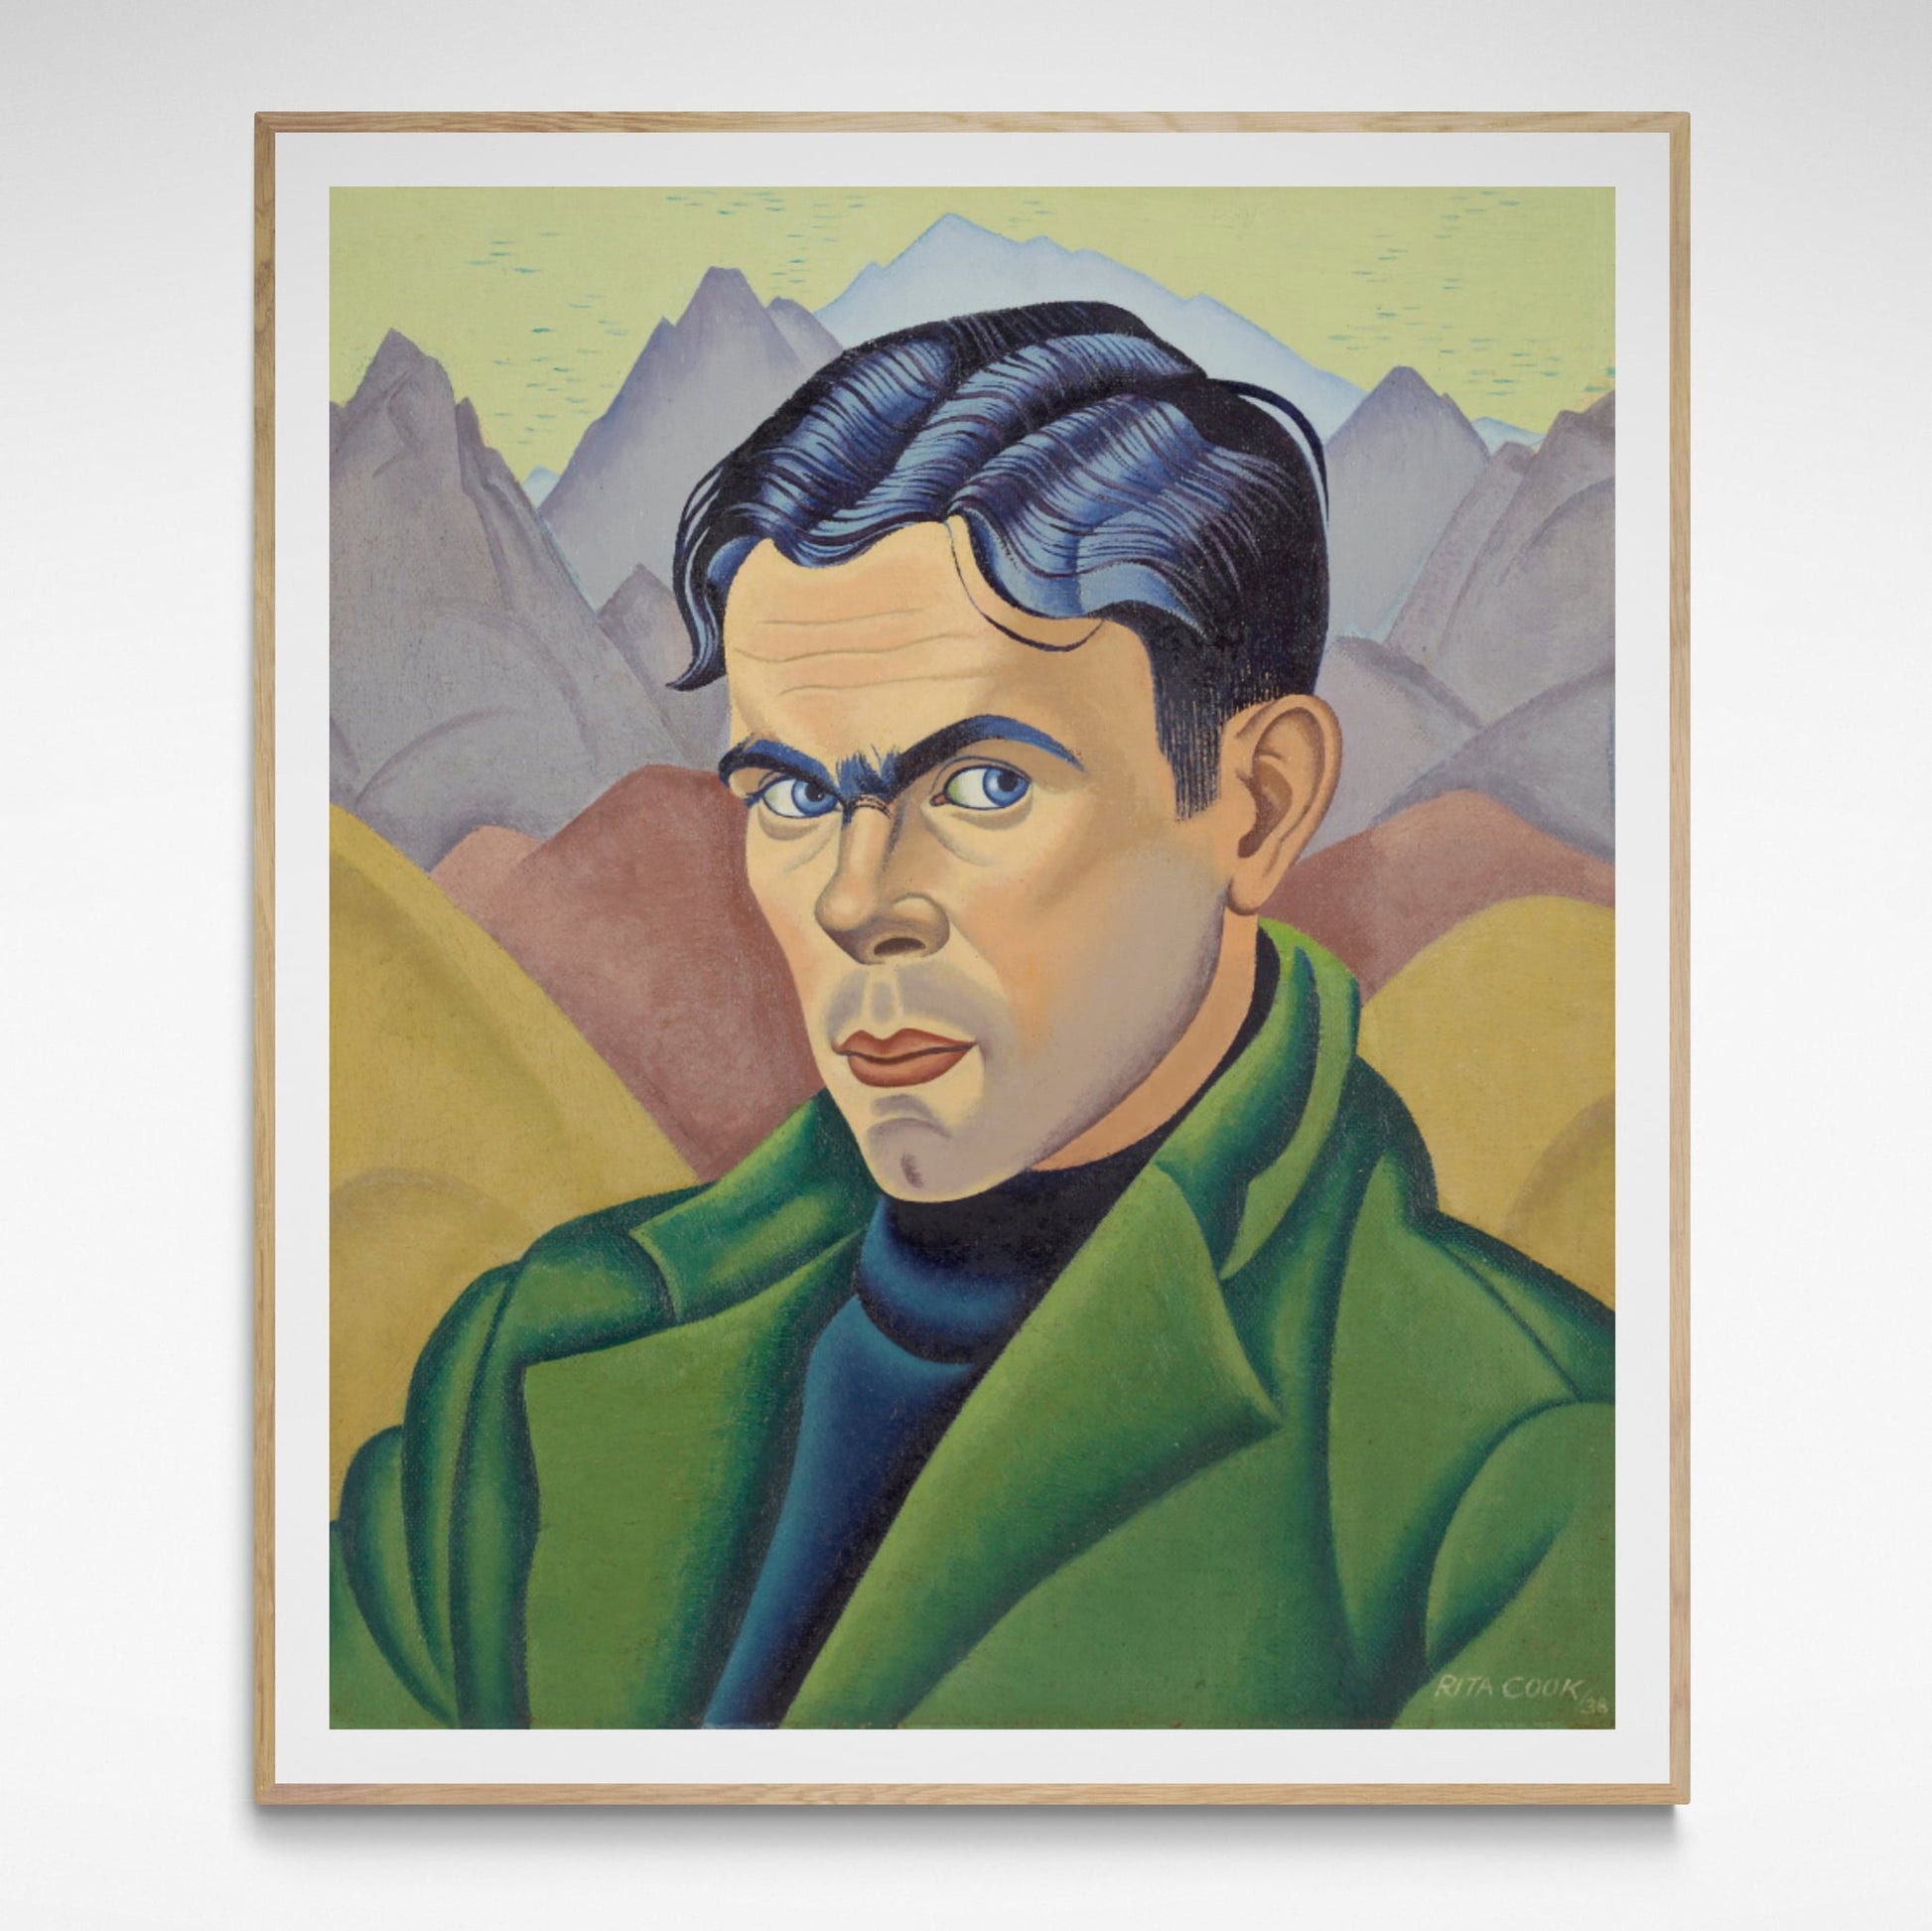 Framed portrait of a man in a green coat against a background of mountains.